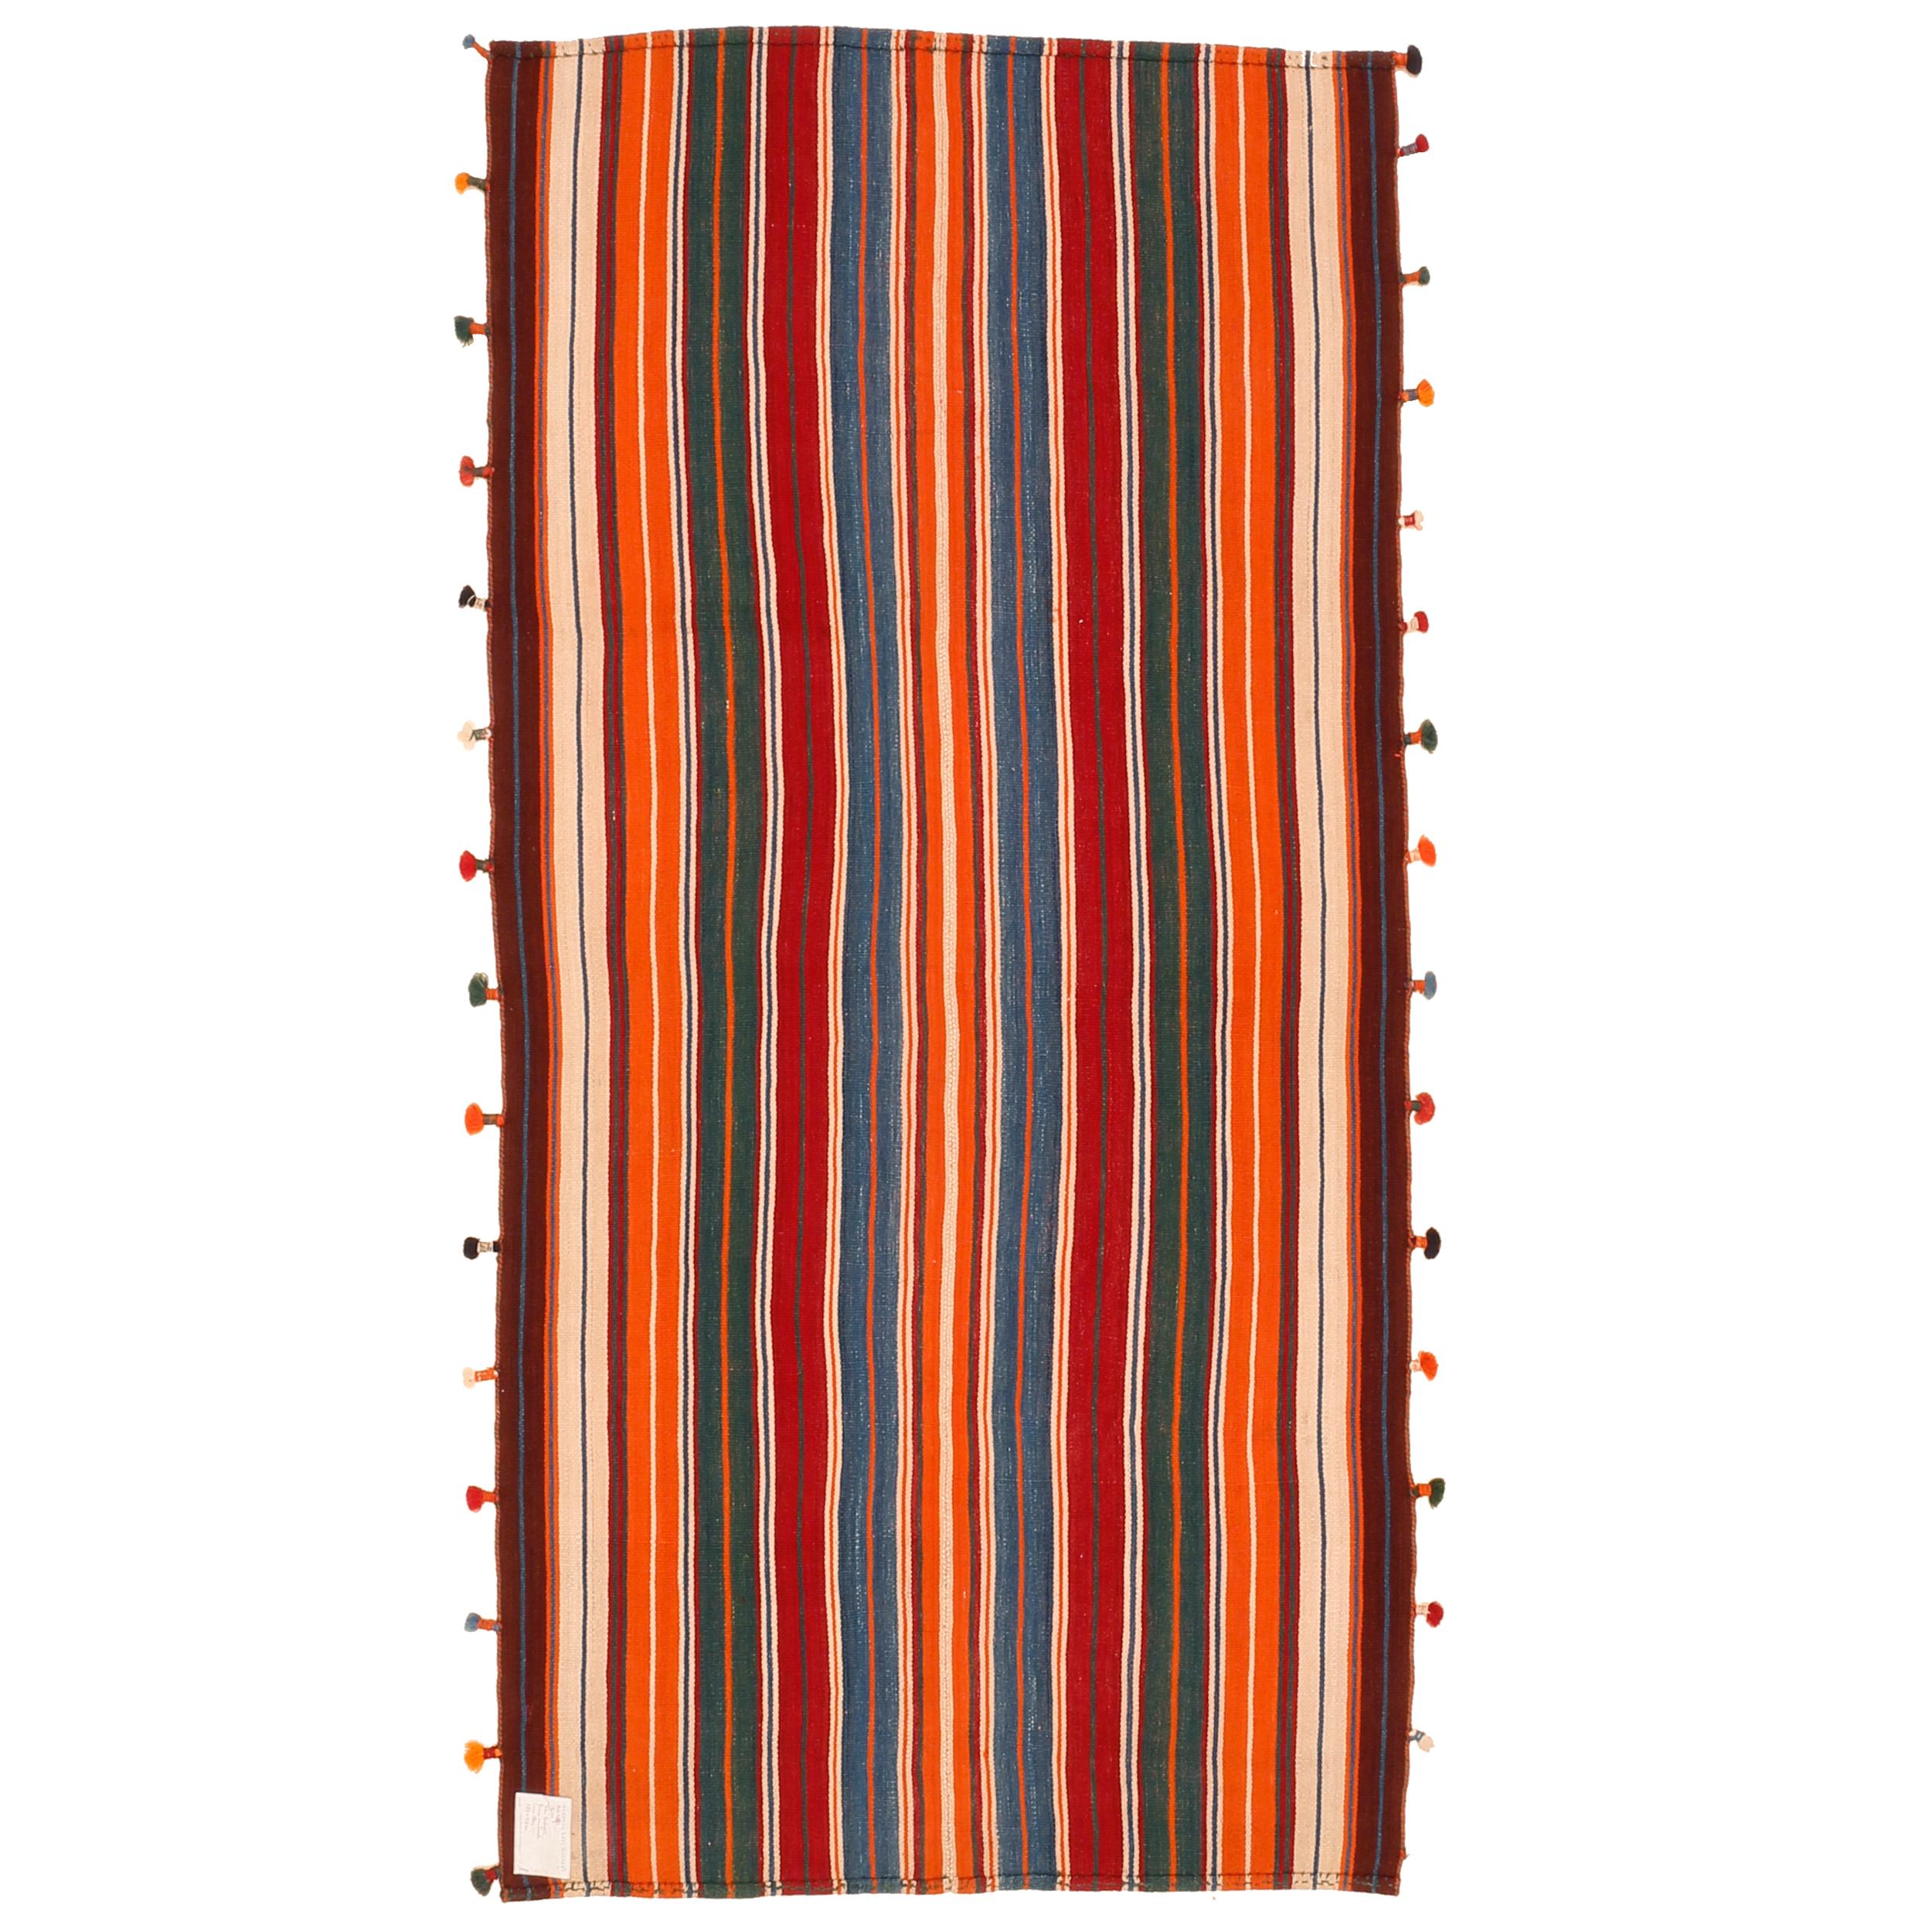 A graphic tribal kilim composed of two joined panels each containing an array of polychrome vertical stripes in a variety of natural colours. The result is a wool flat-weave with a mirror image pattern. What makes this example rather unique is the